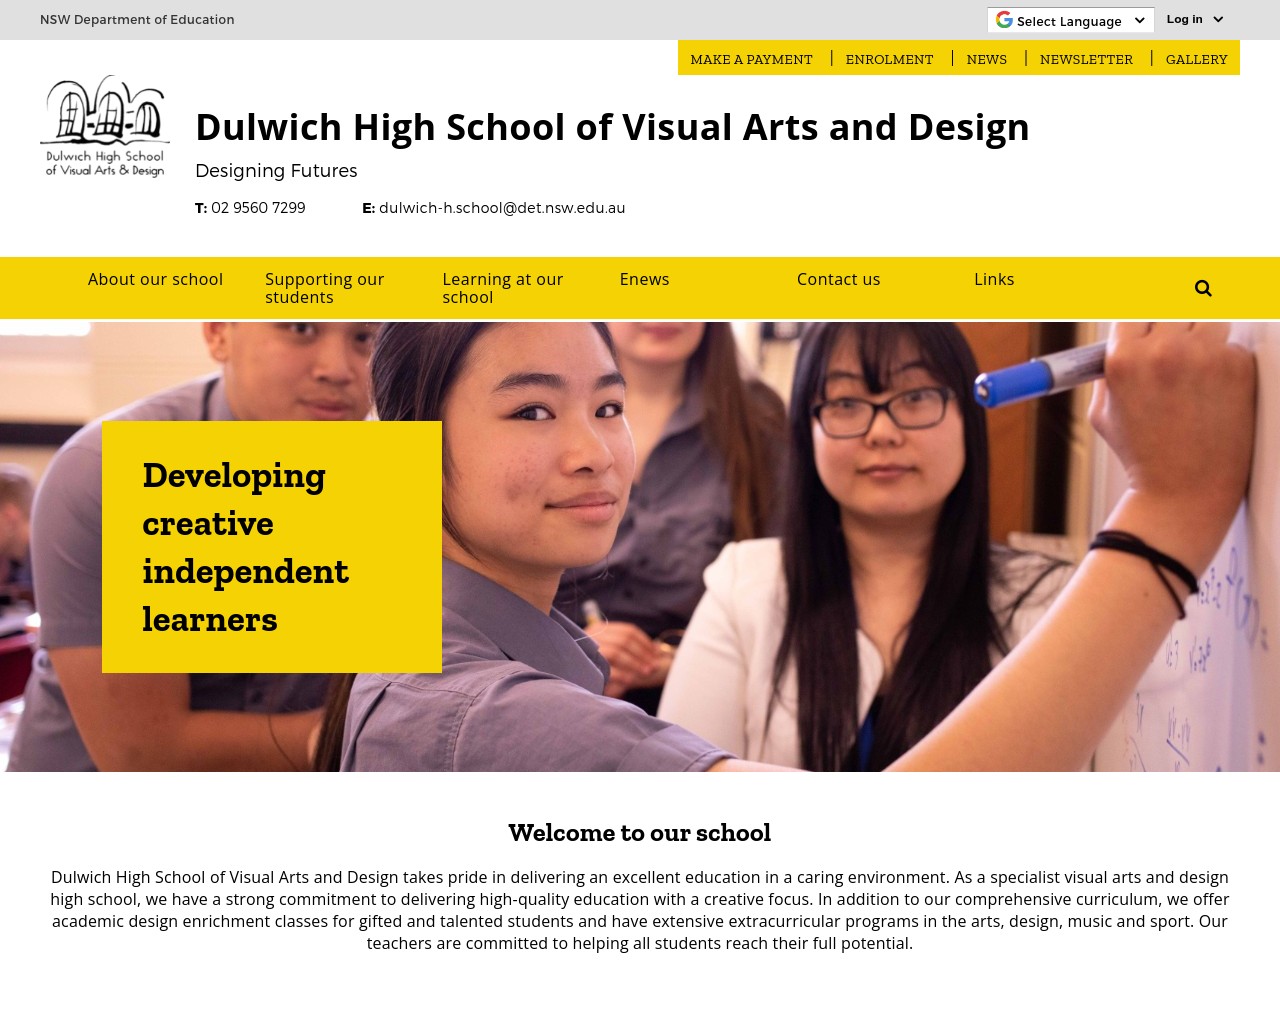 Dulwich Hill School of Visual Arts and Design